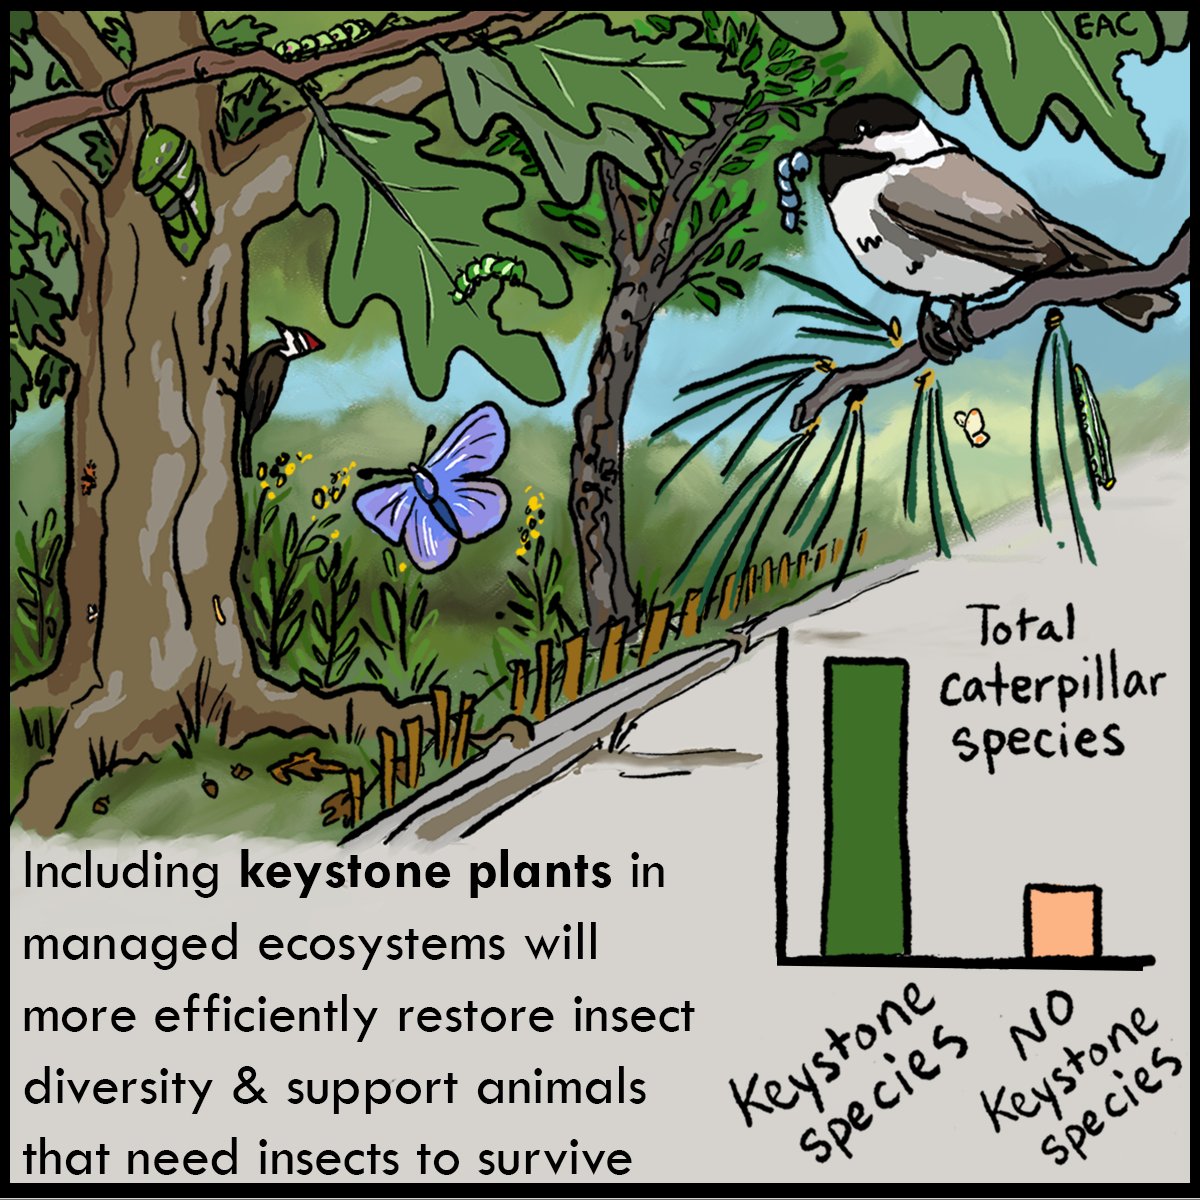 The importance of Lepidoptera as prey for consumers (e.g. birds!) means that prioritizing keystone plants can be part of our tool kit for more informed food web restoration. This approach is especially relevant for restoration in highly managed/novel ecosystems (e.g. urban, etc).